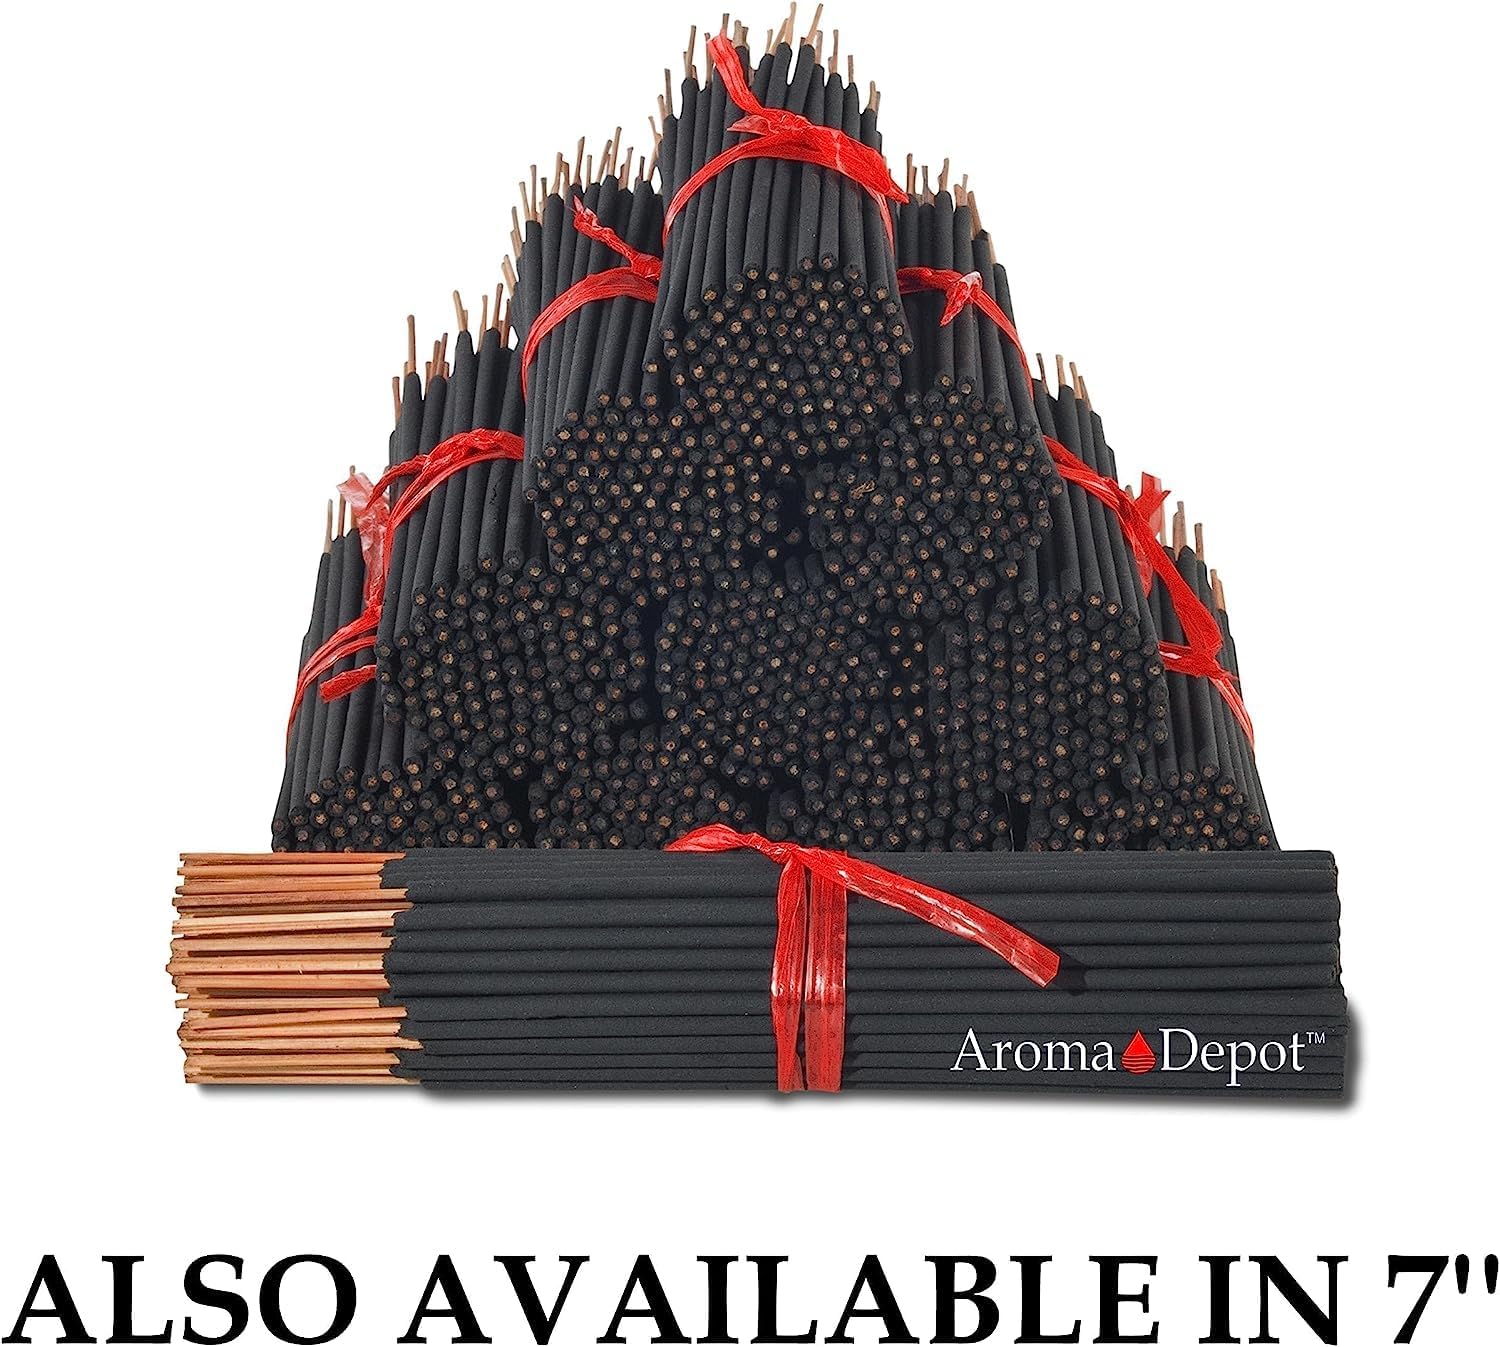 Nag Champa Most Exotic 11 Incense Sticks. Approx. 85 to 100 Sticks Per Bundle, Each Natural Stick Burns for 45 mins to 1 Hour Each. Long Lasting Guarantee 100% Pure